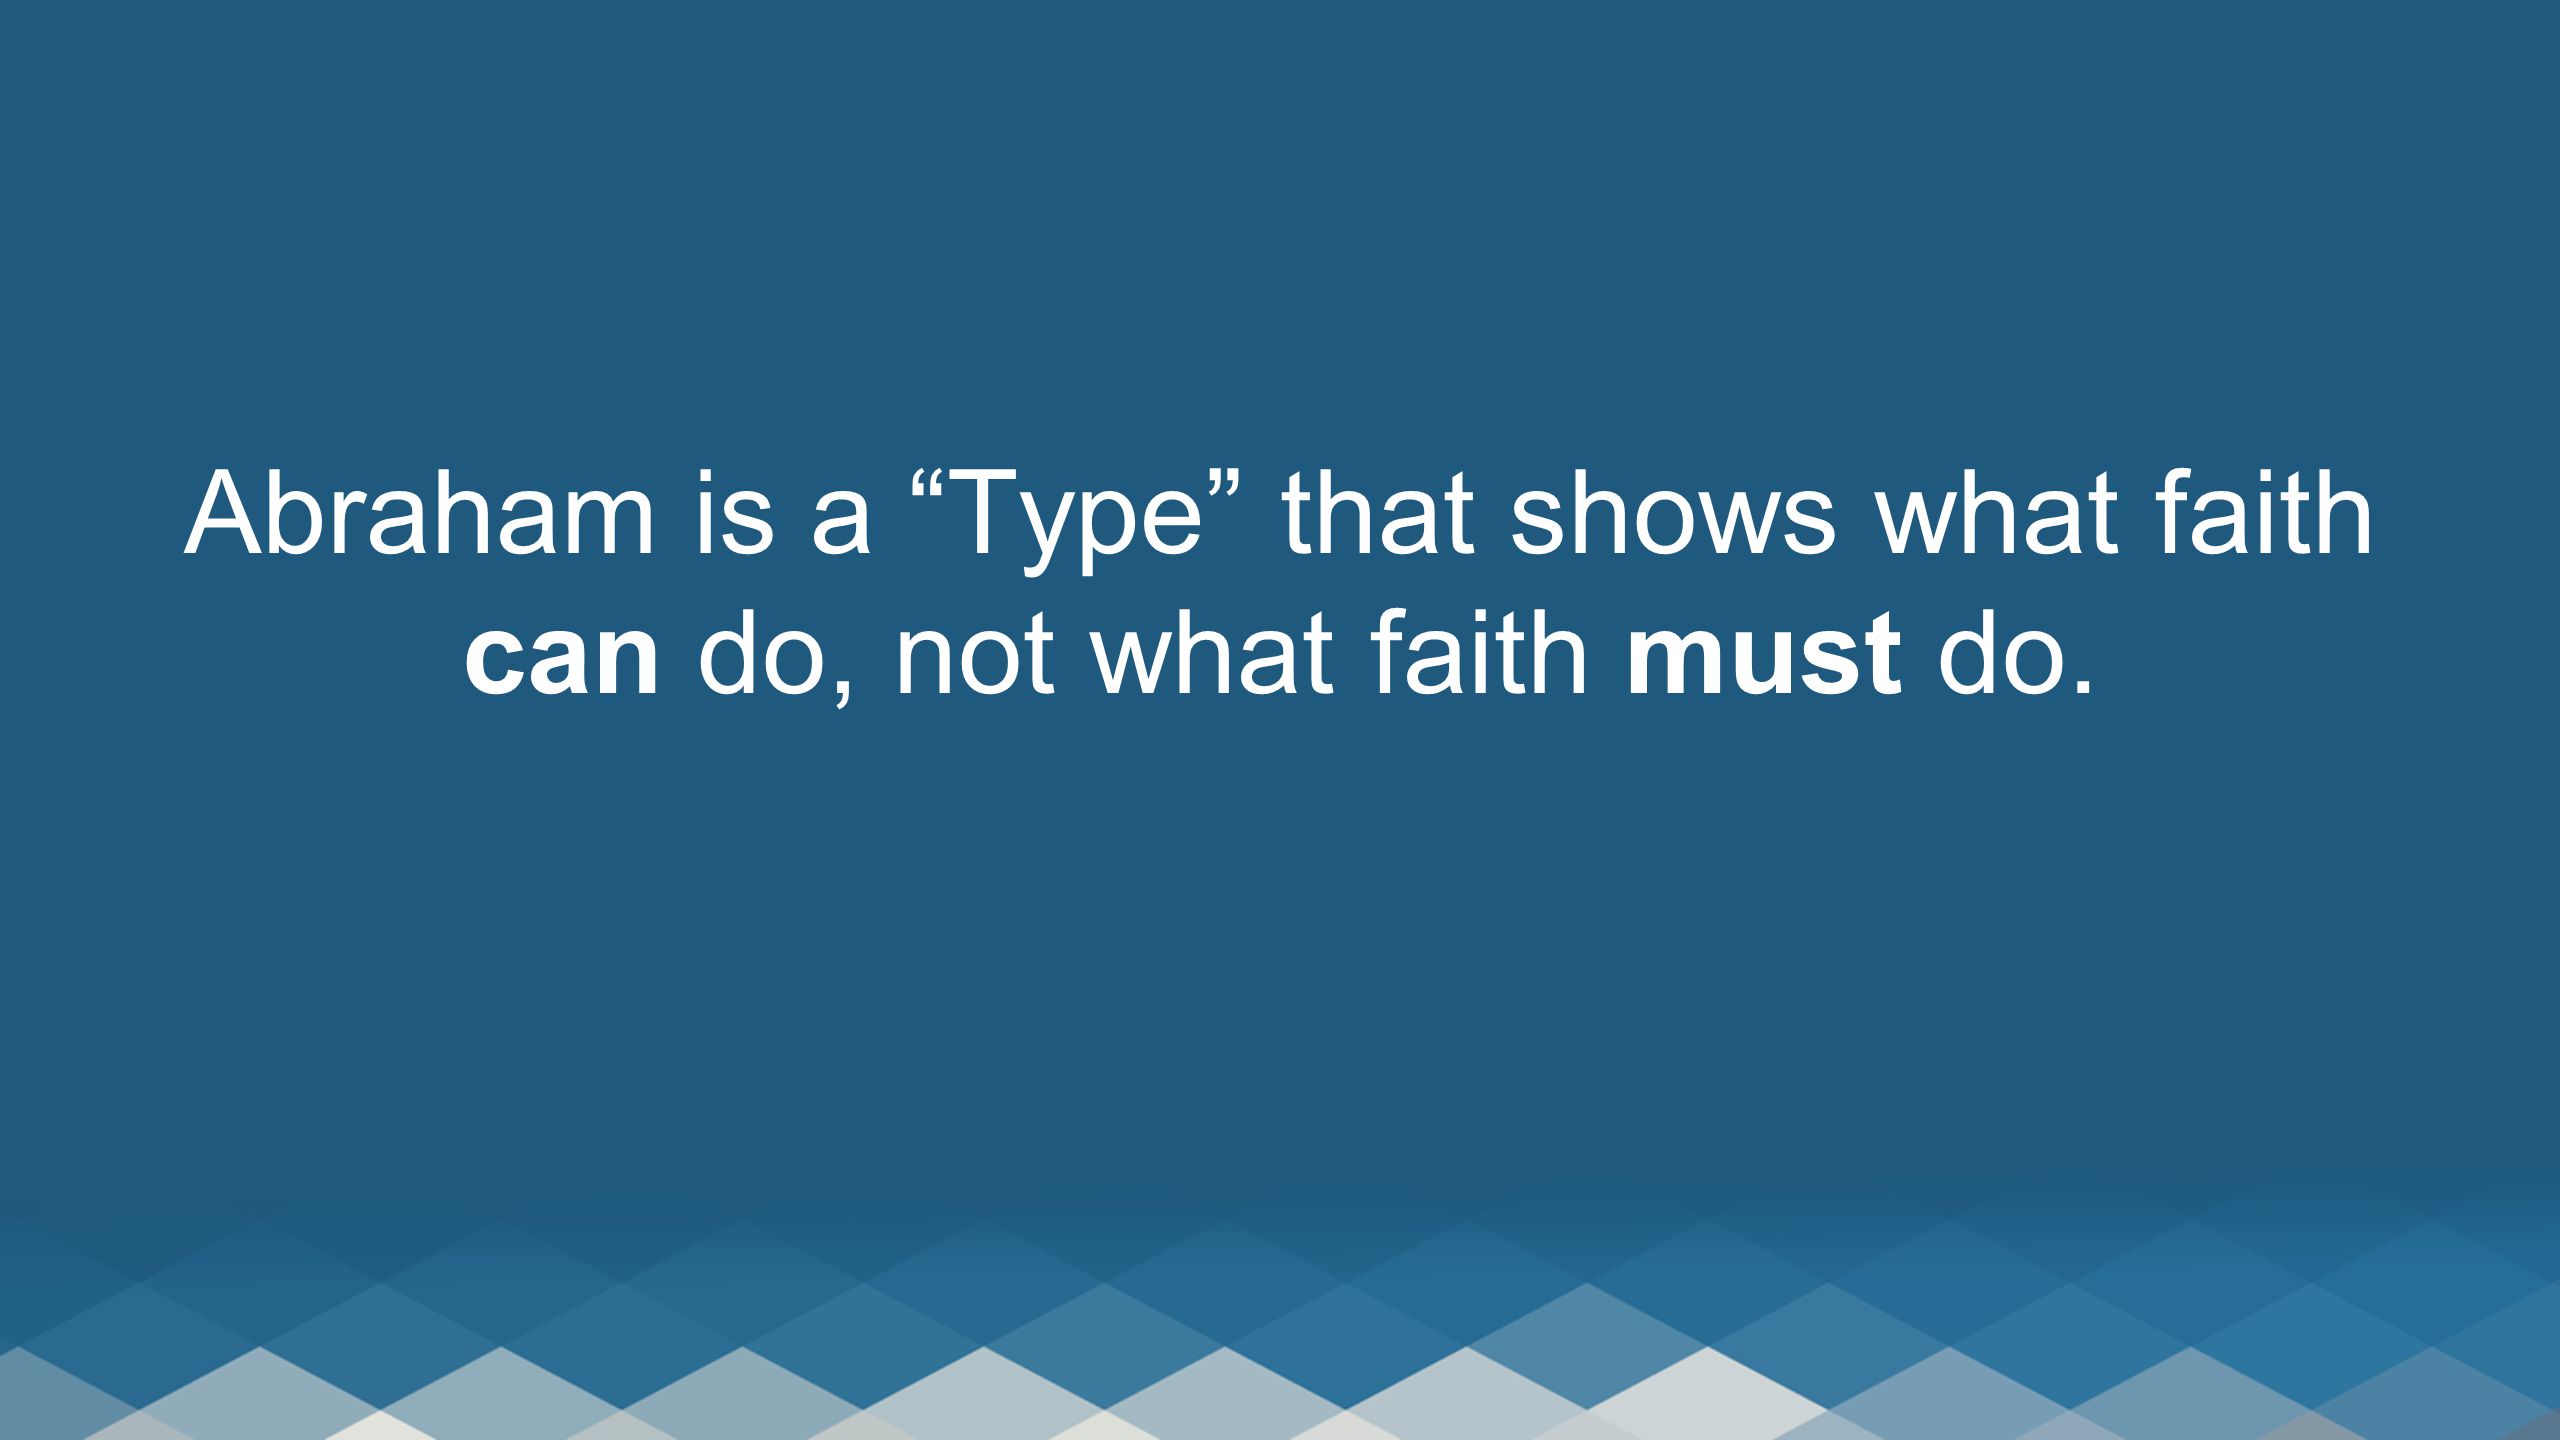 Abraham is a Type that shows what faith can do, not what faith must do.